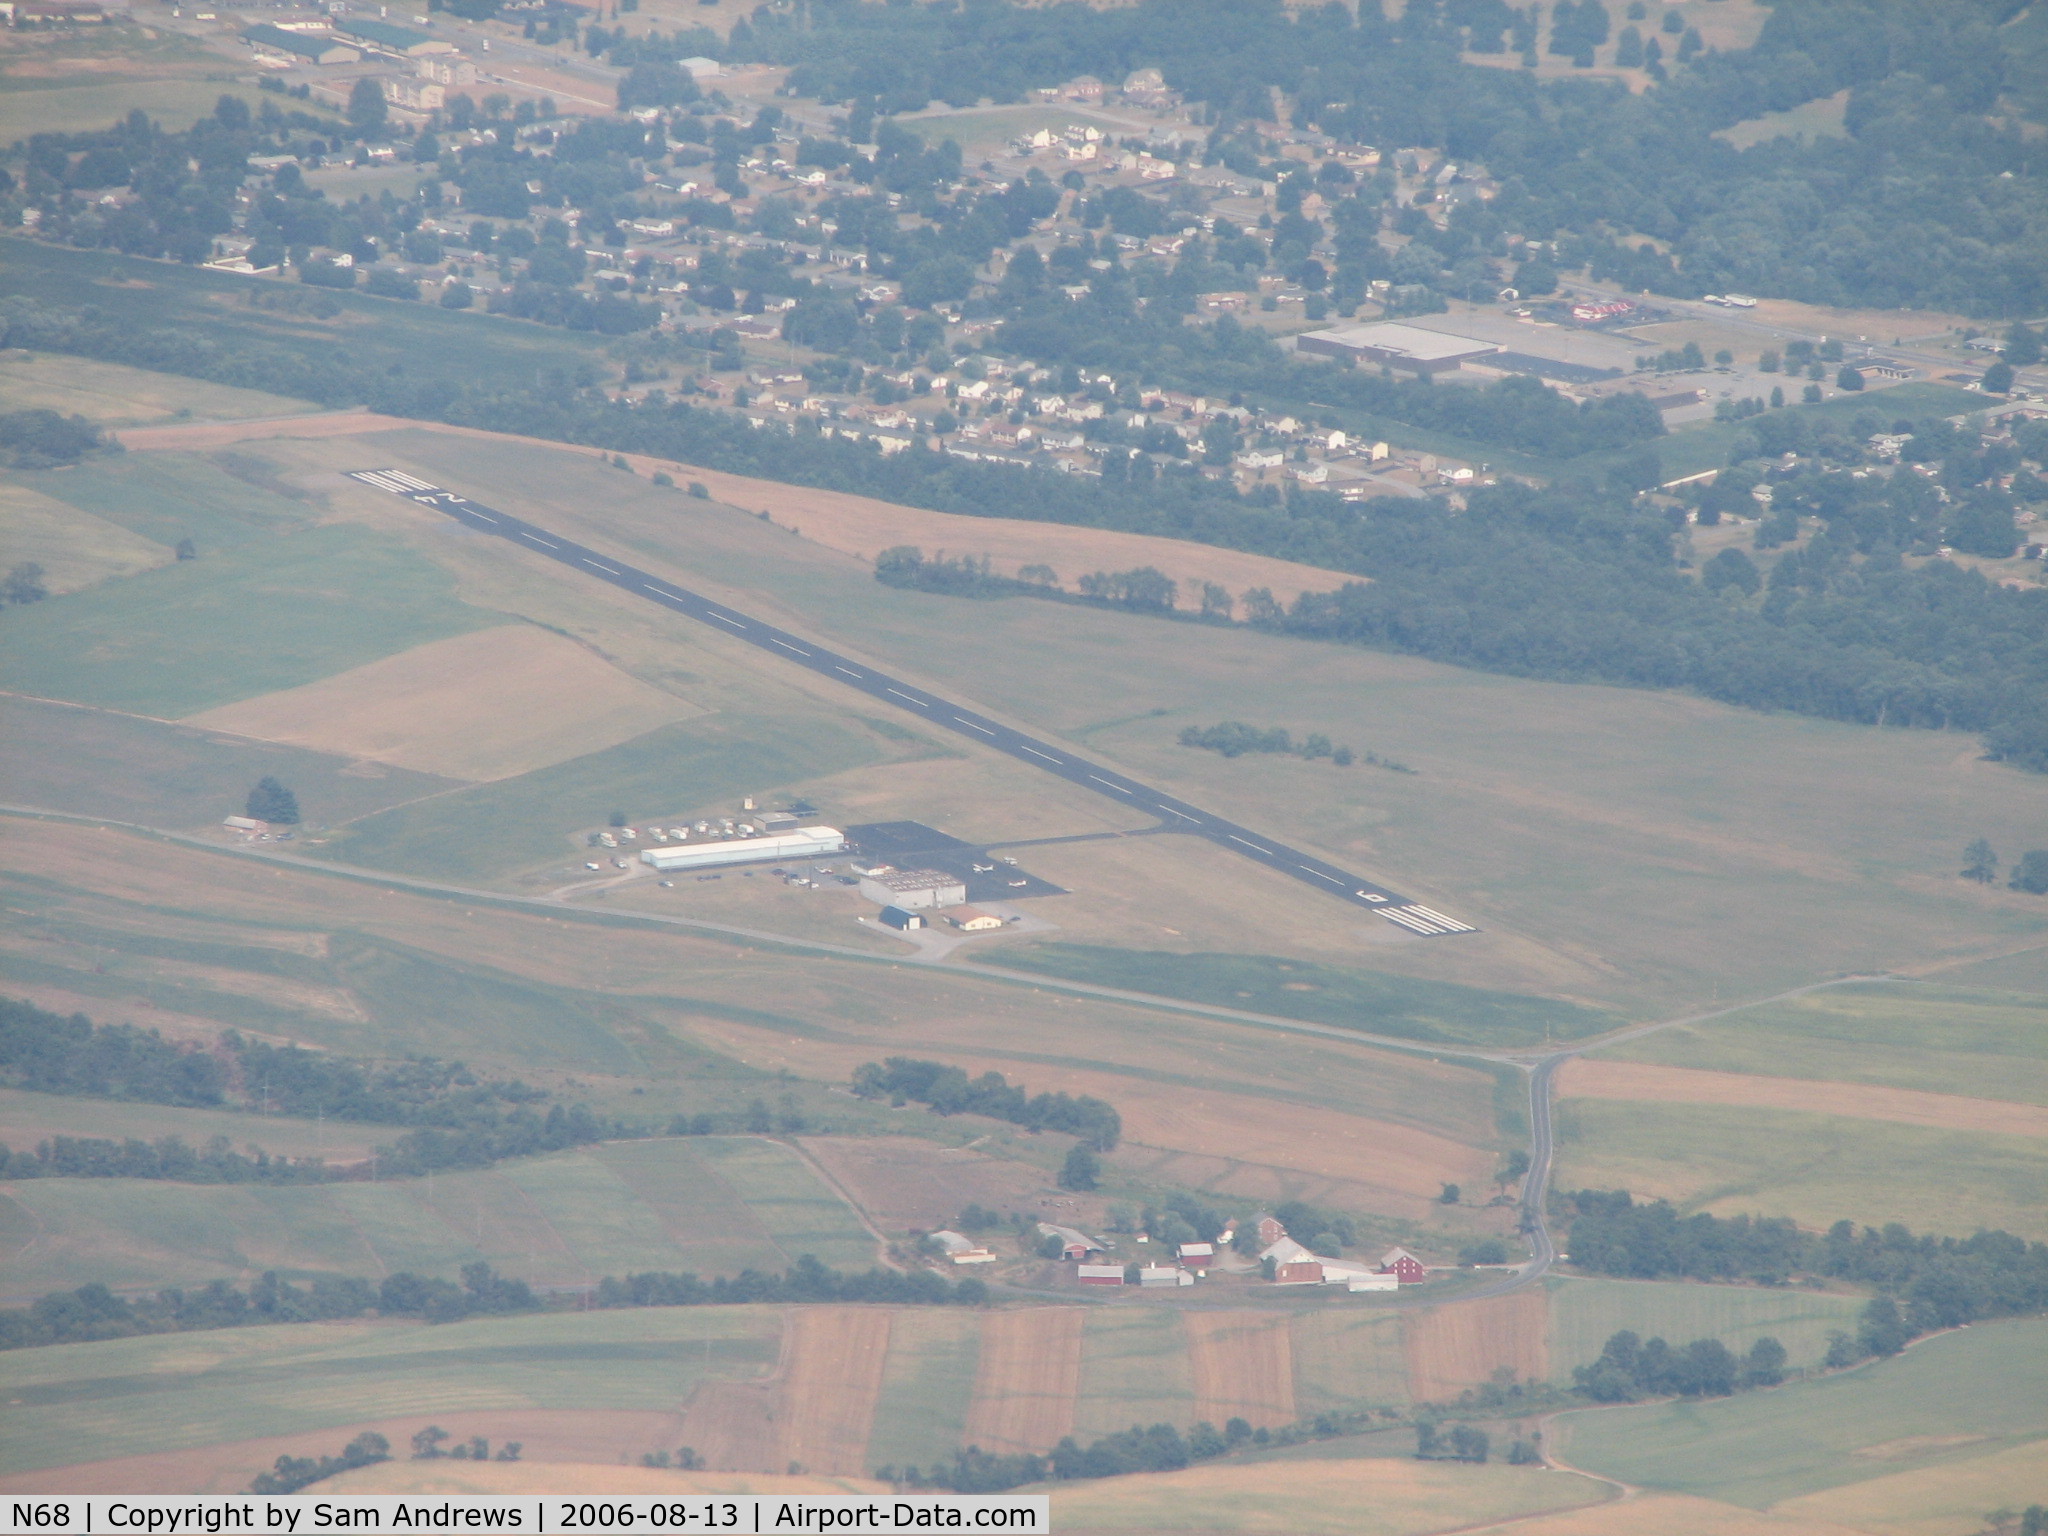 Franklin County Regional Airport (N68) - Nice little airport in a small town in South Central PA, Chambersburg.  Just north of Hagerstown, MD